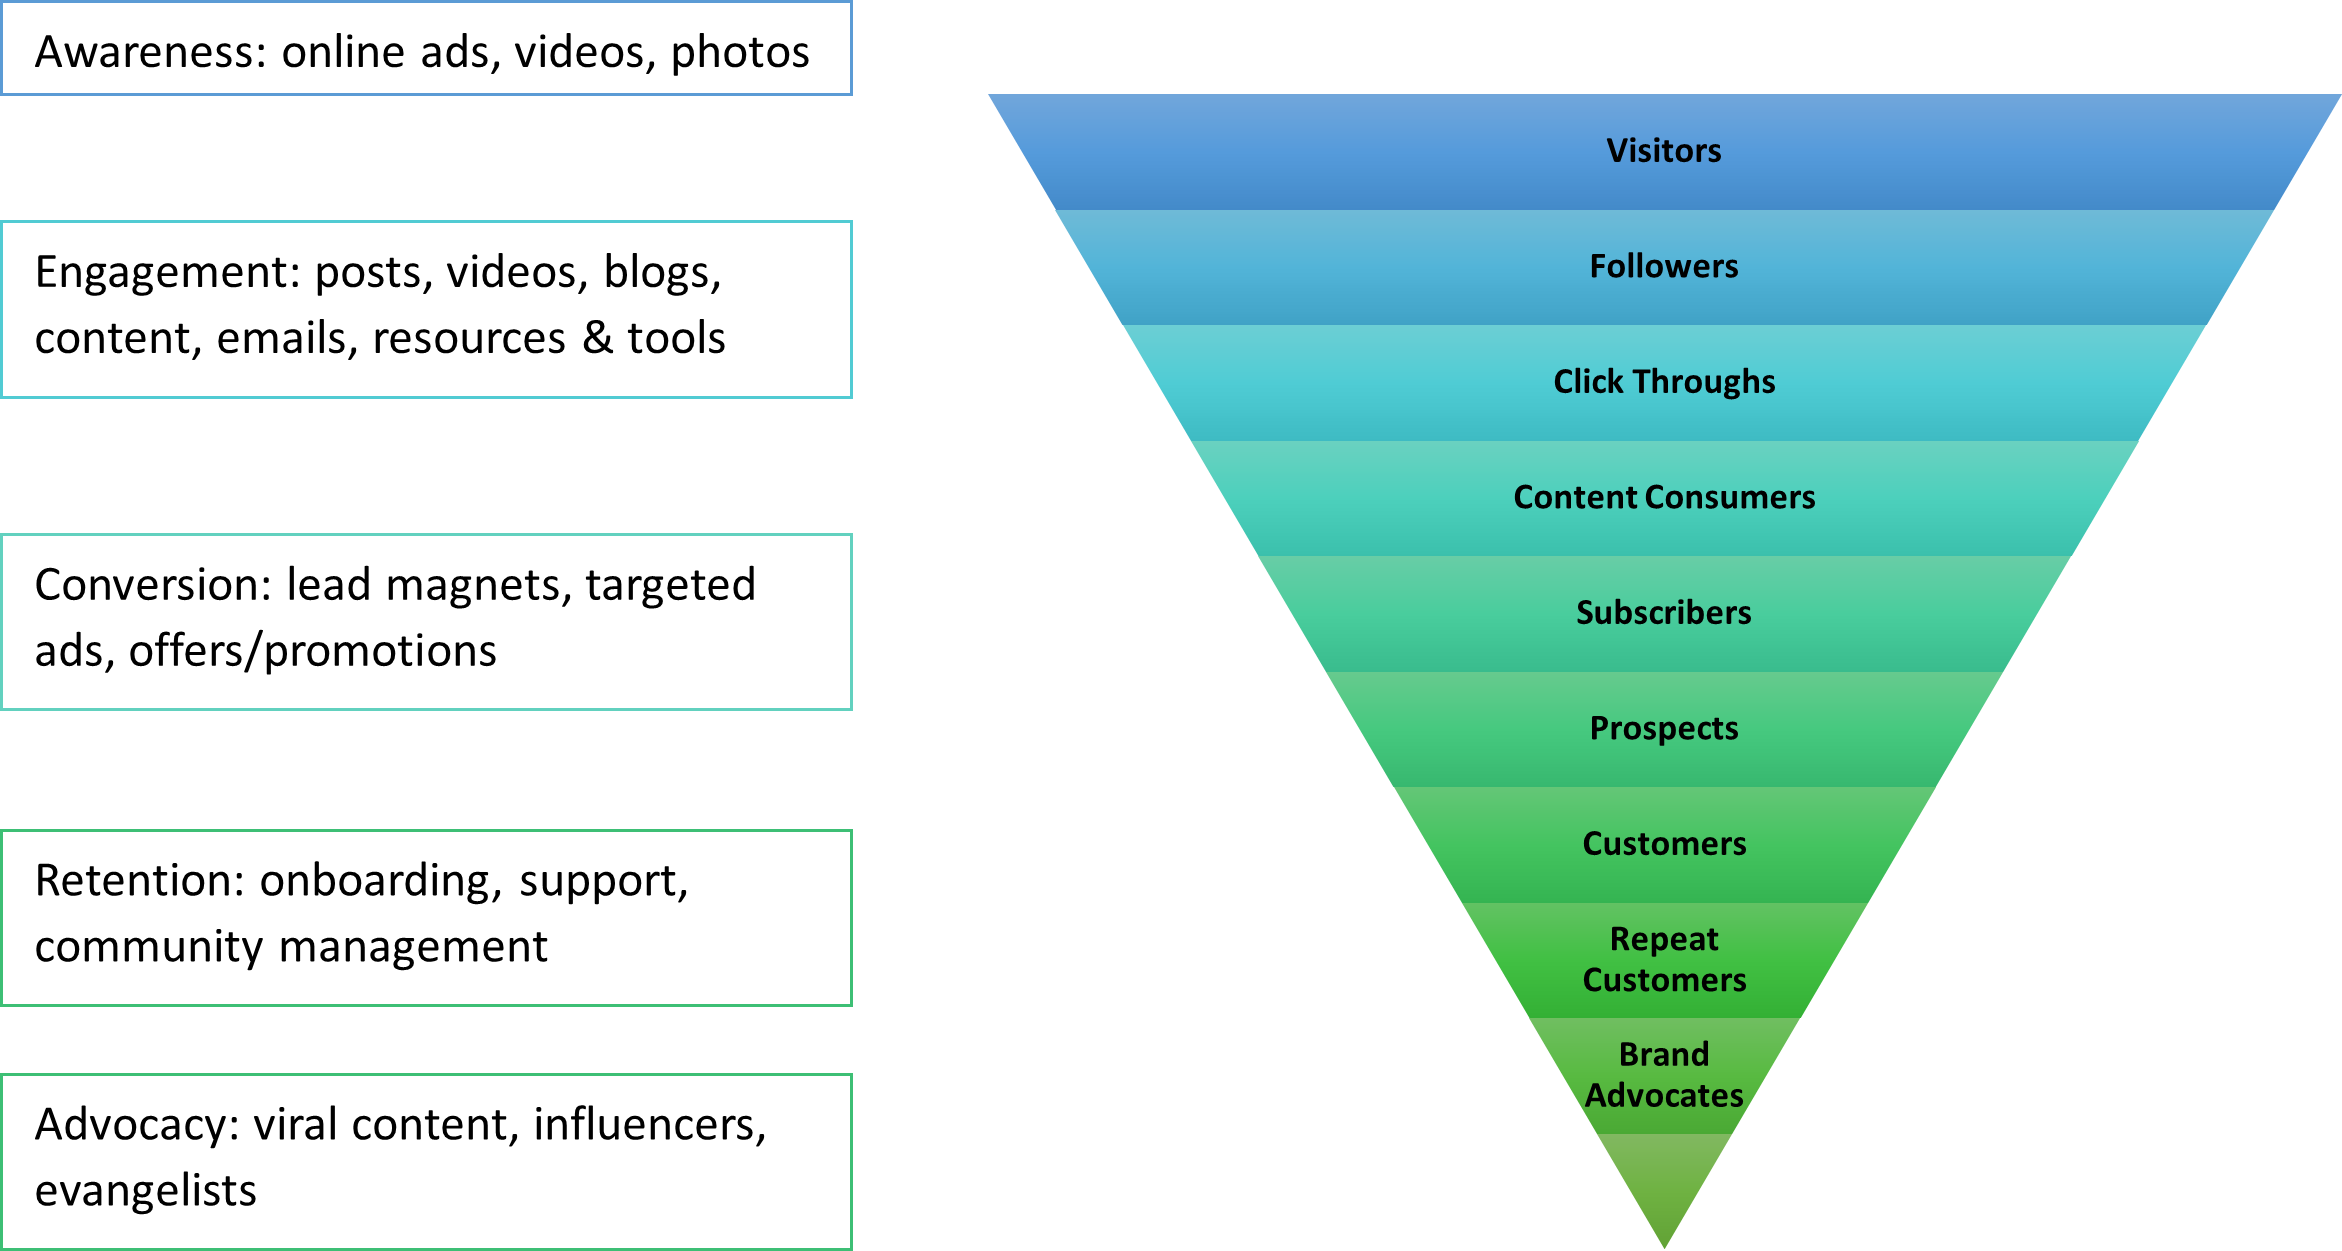 A diagram showing what types of content are used to reach customers at different stages of the customer journey. Image description available.